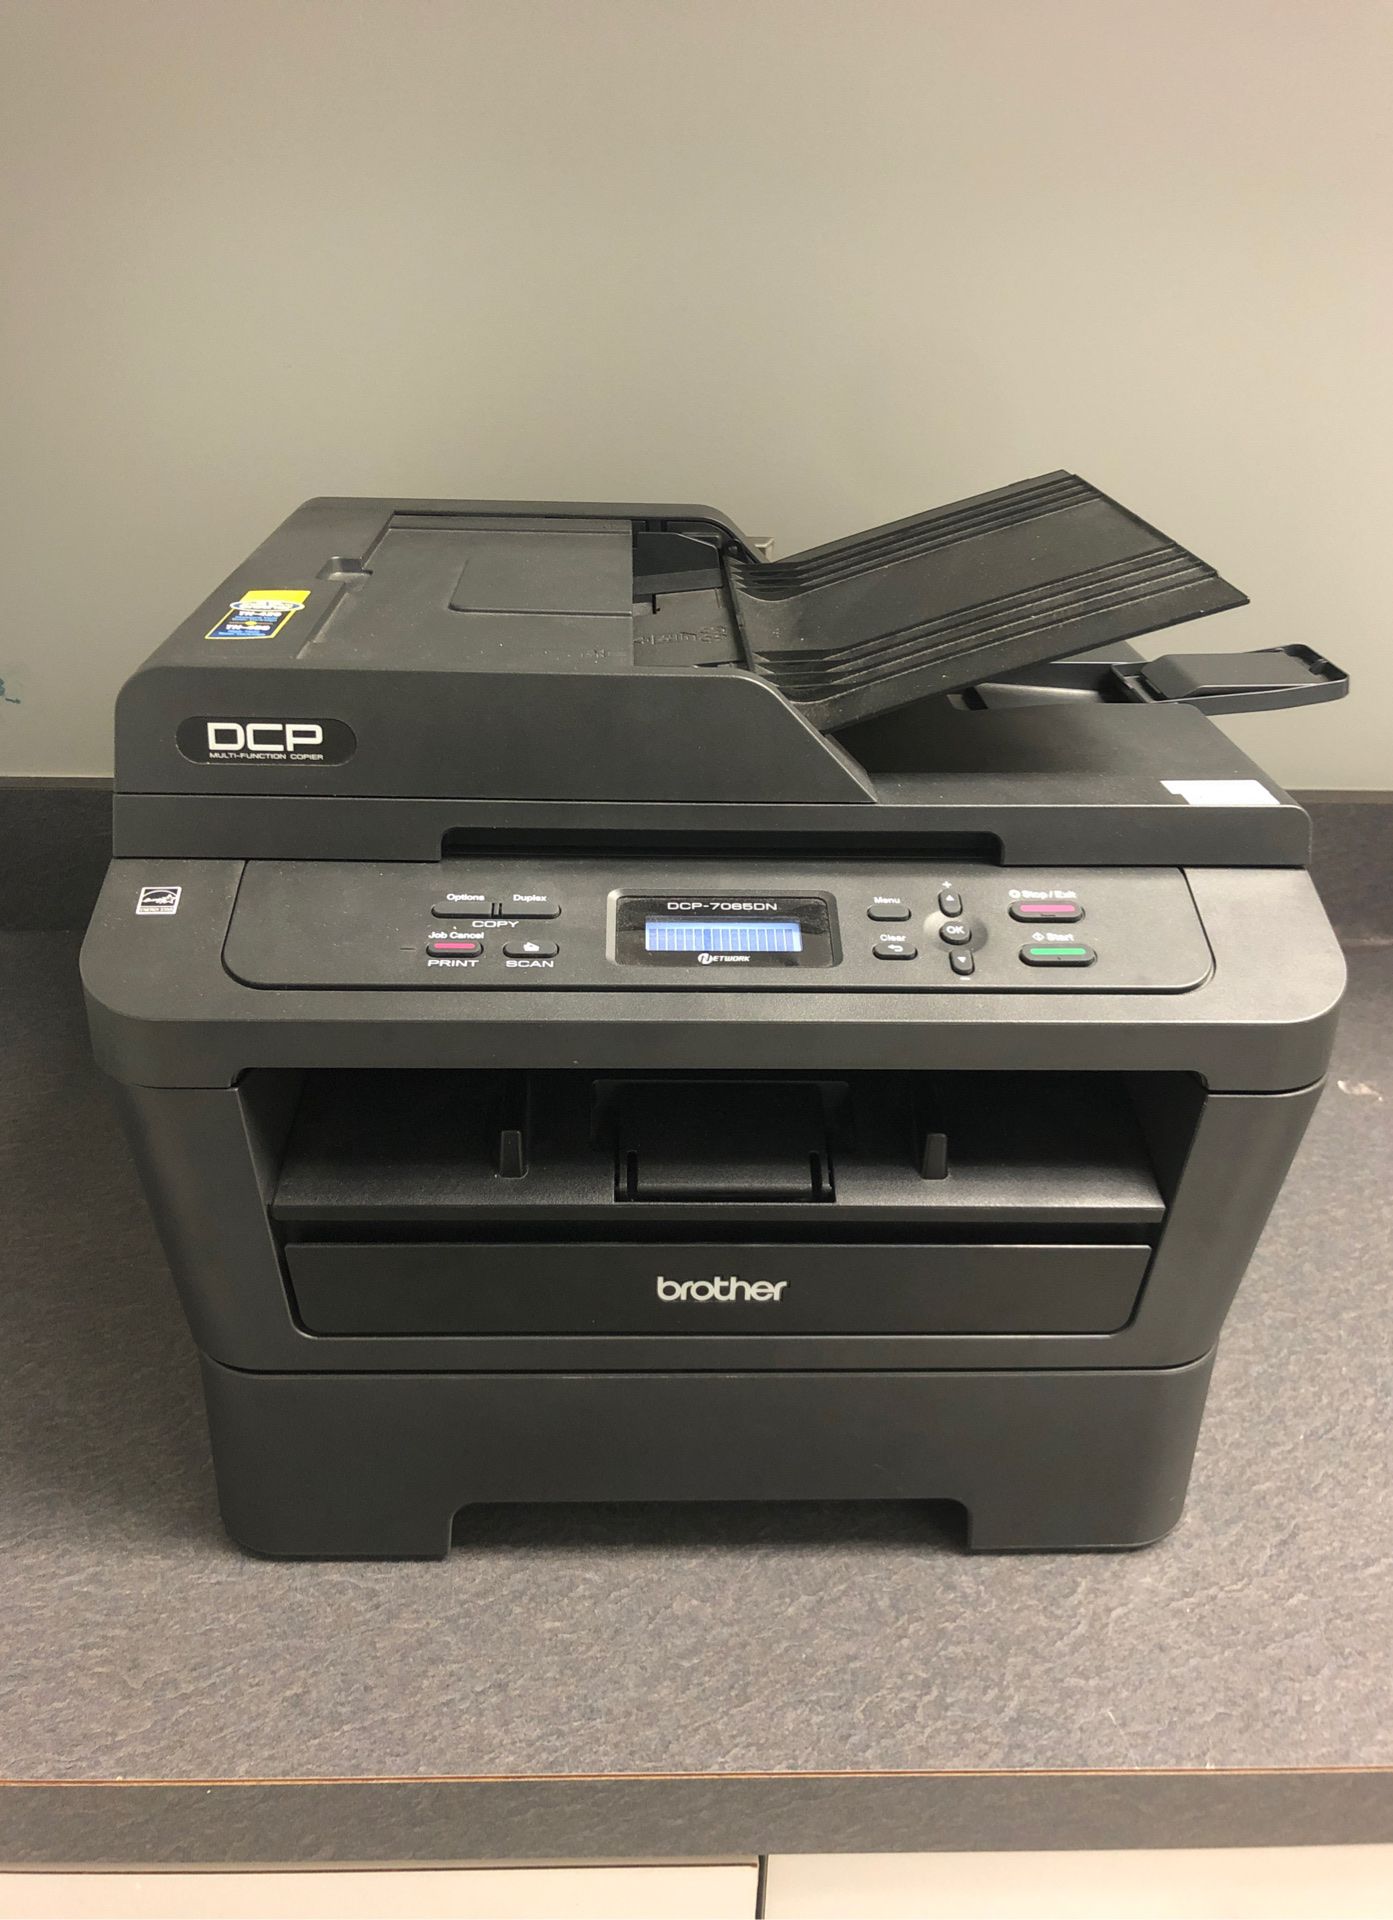 Brother Printer (Great condition)